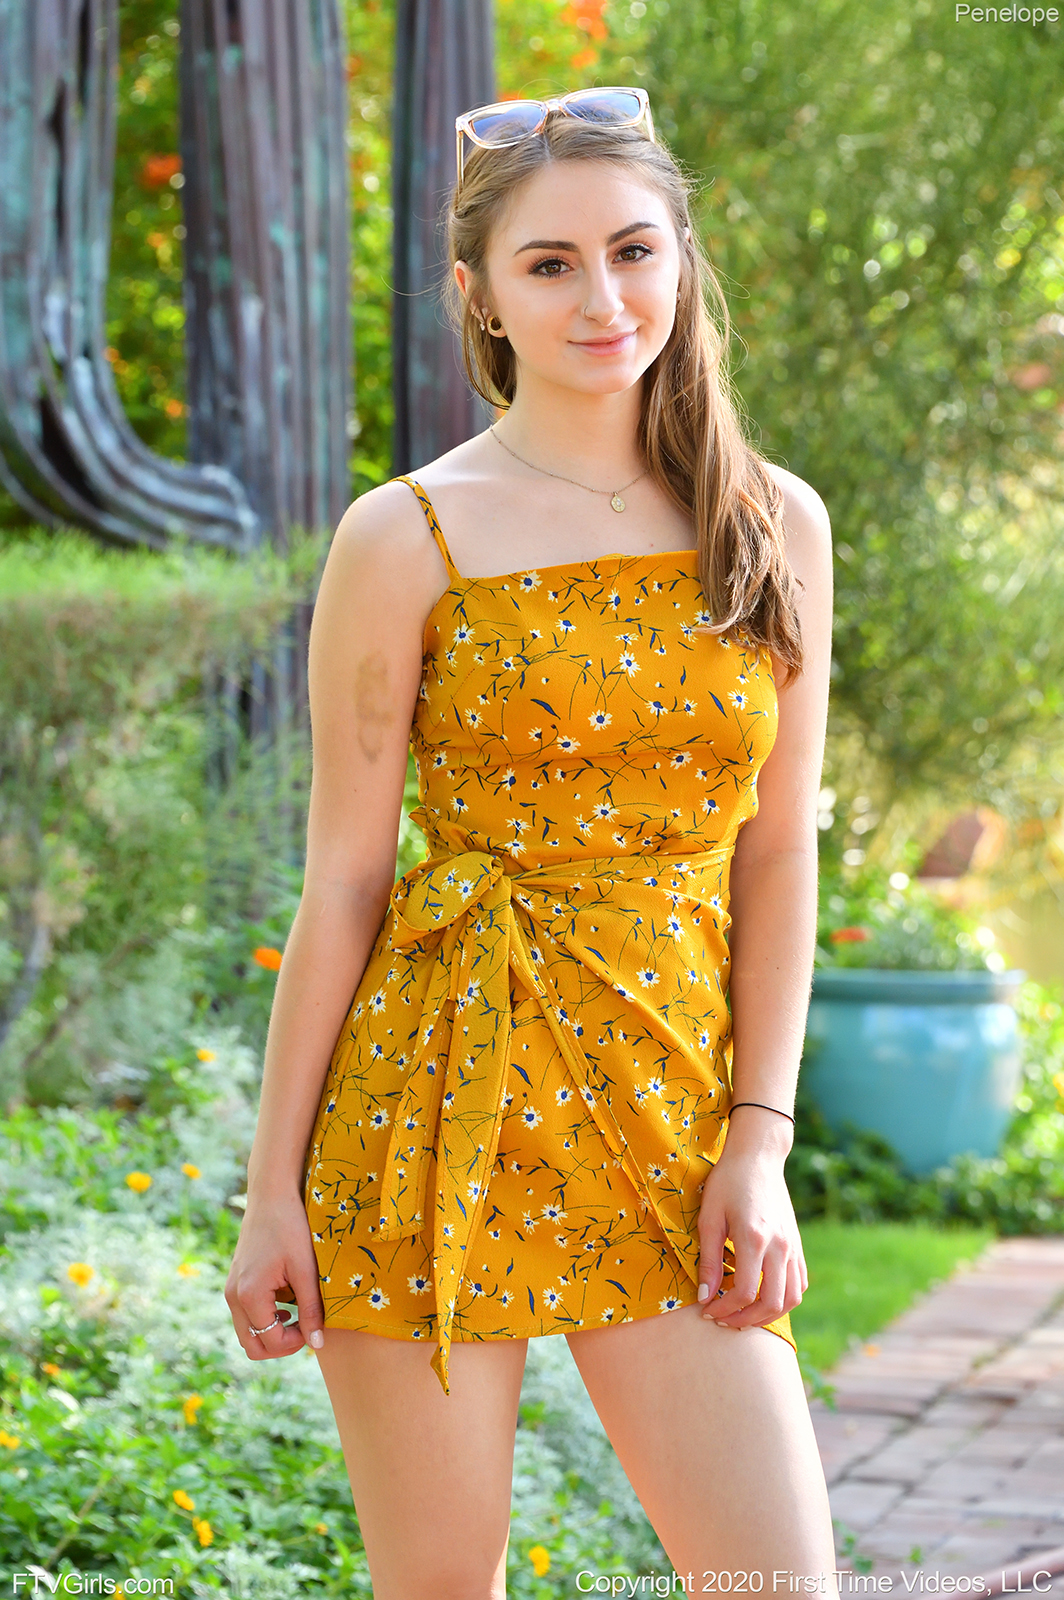 teen pornstar penelope ftv is non nude wearing a sexy dark orange floral dress while standing outdoors in Sunny Yellow